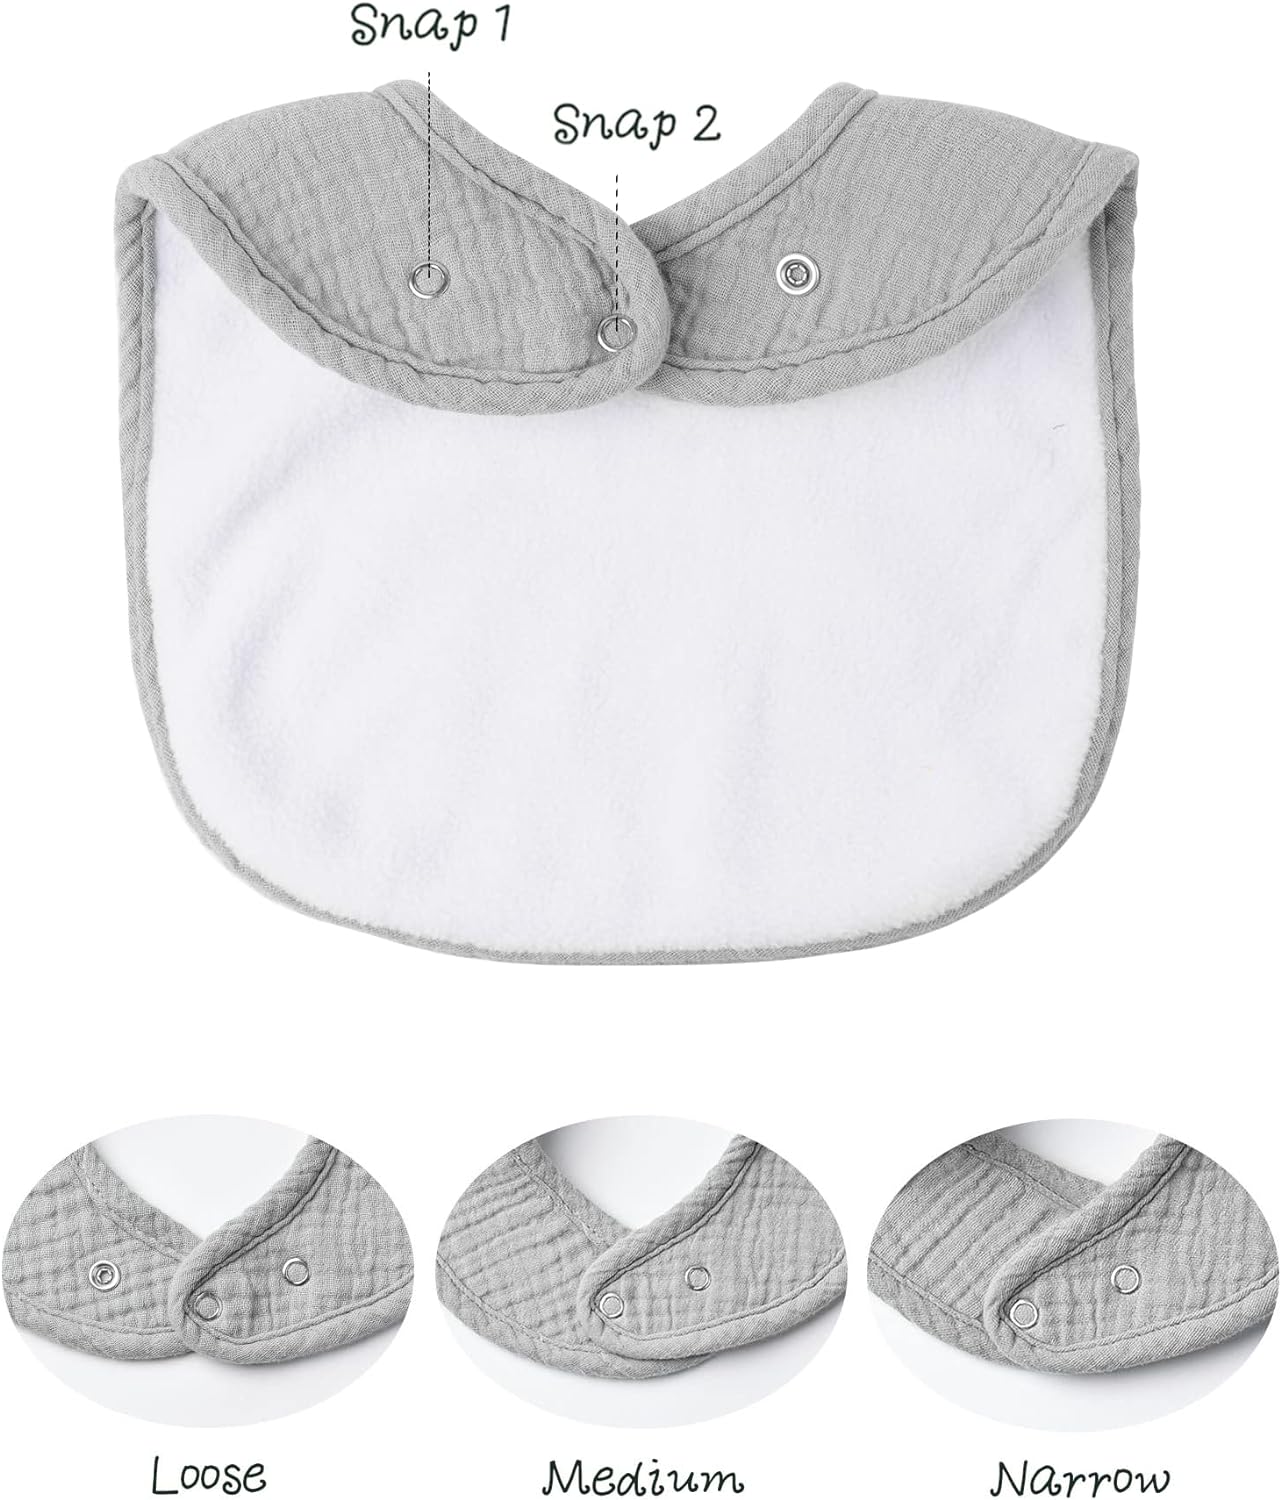 Konssy Muslin Baby Bibs 8 Pack Baby Bandana Drool Bibs Cotton for Unisex Boys Girls, 8 Solid Colors Set for Teething Drooling